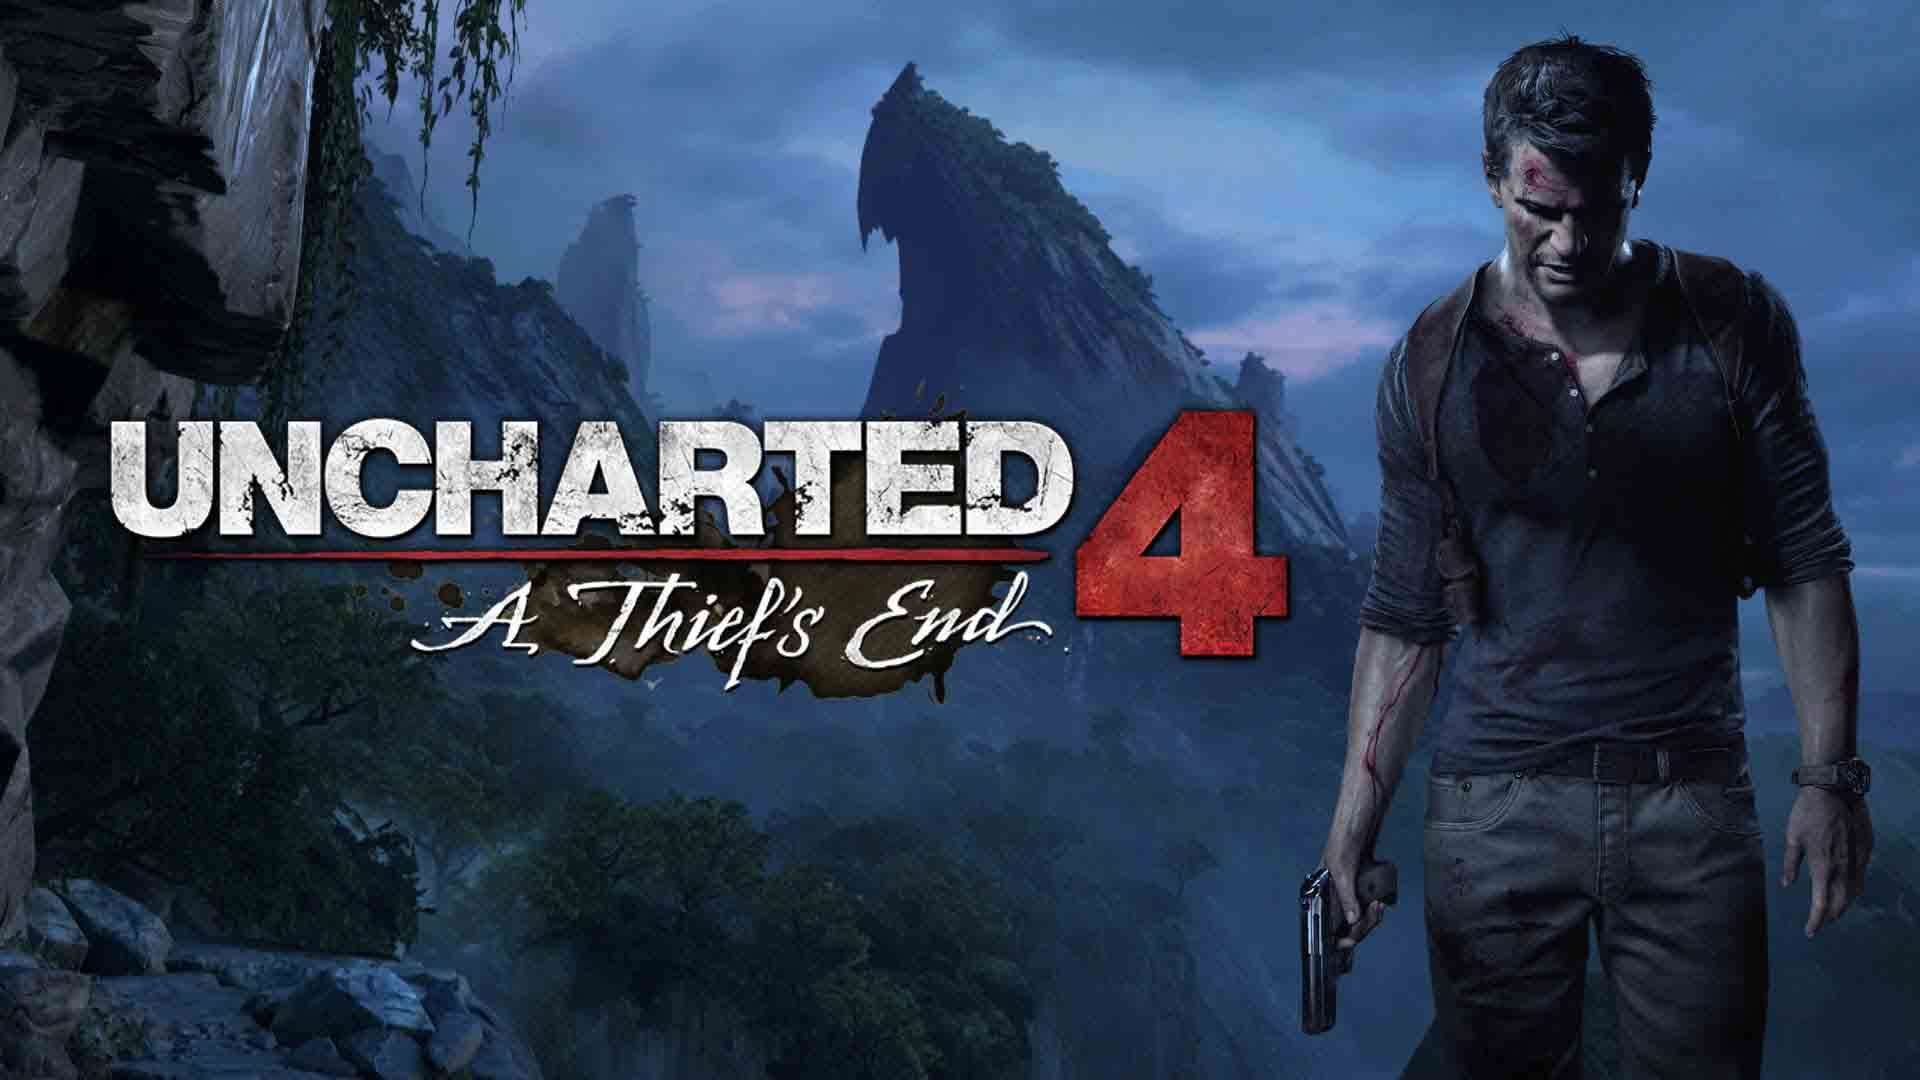 Uncharted 4 A Thief's End.jpg